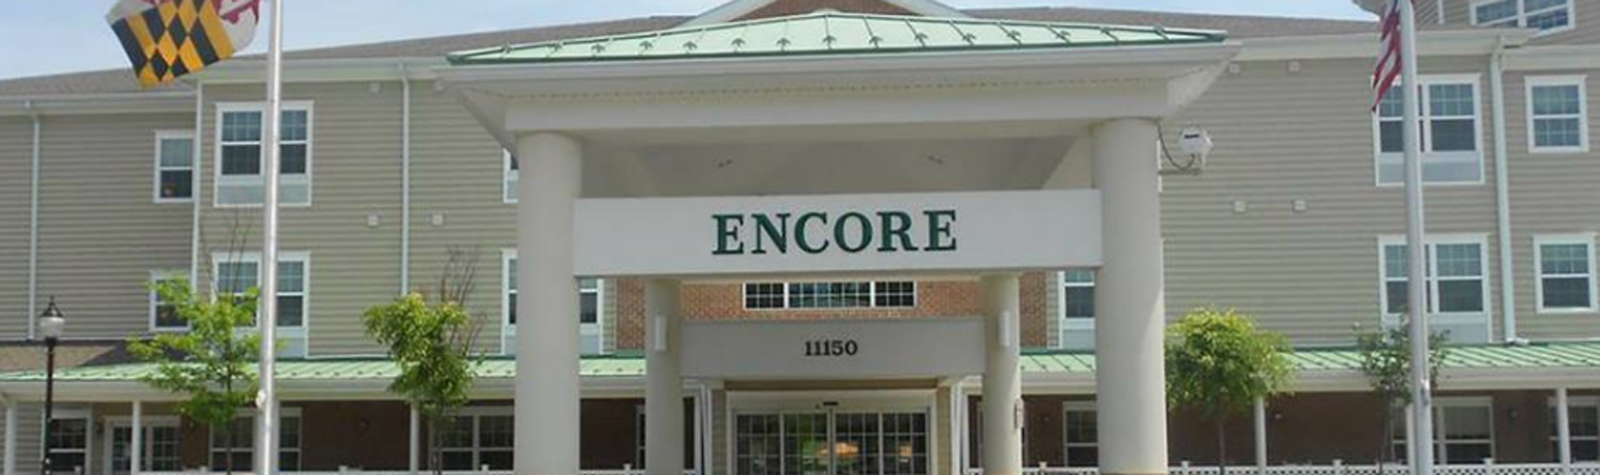 Lorien Encore at Turf Valley is the Newest CPDC™ Accredited Care Facility